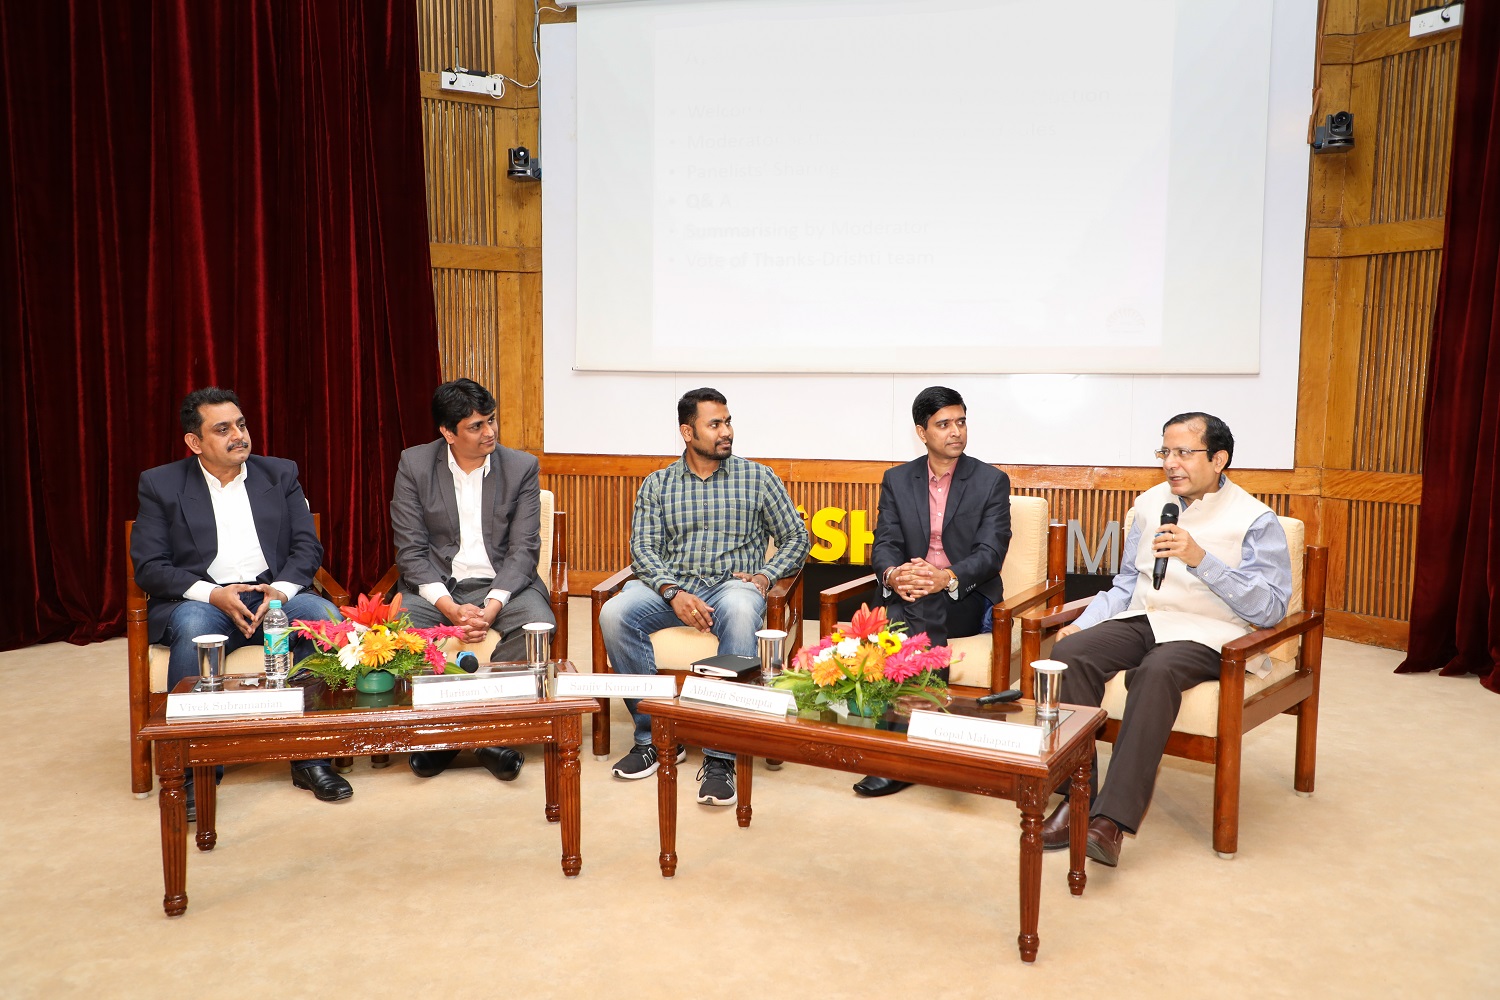 (L-R) Vivek Subramanian, Director, Talent Development, Fidelity Investments; Hariram V M, HR Leade, Adecco Group; Sanjiv K Dasmohapatra, Sr. Manager, People Analytics & Tech Trans, Hubilo; Abhrajit Sen Gupta, HR Site Lead, India Ops, AZ; Prof. Gopal Mahapatra, Faculty from the Organizational Behavior & Human Resources Management area, IIMB, at the panel discussion on Enriching Talent Experience for Business Sustainability at Drishti.